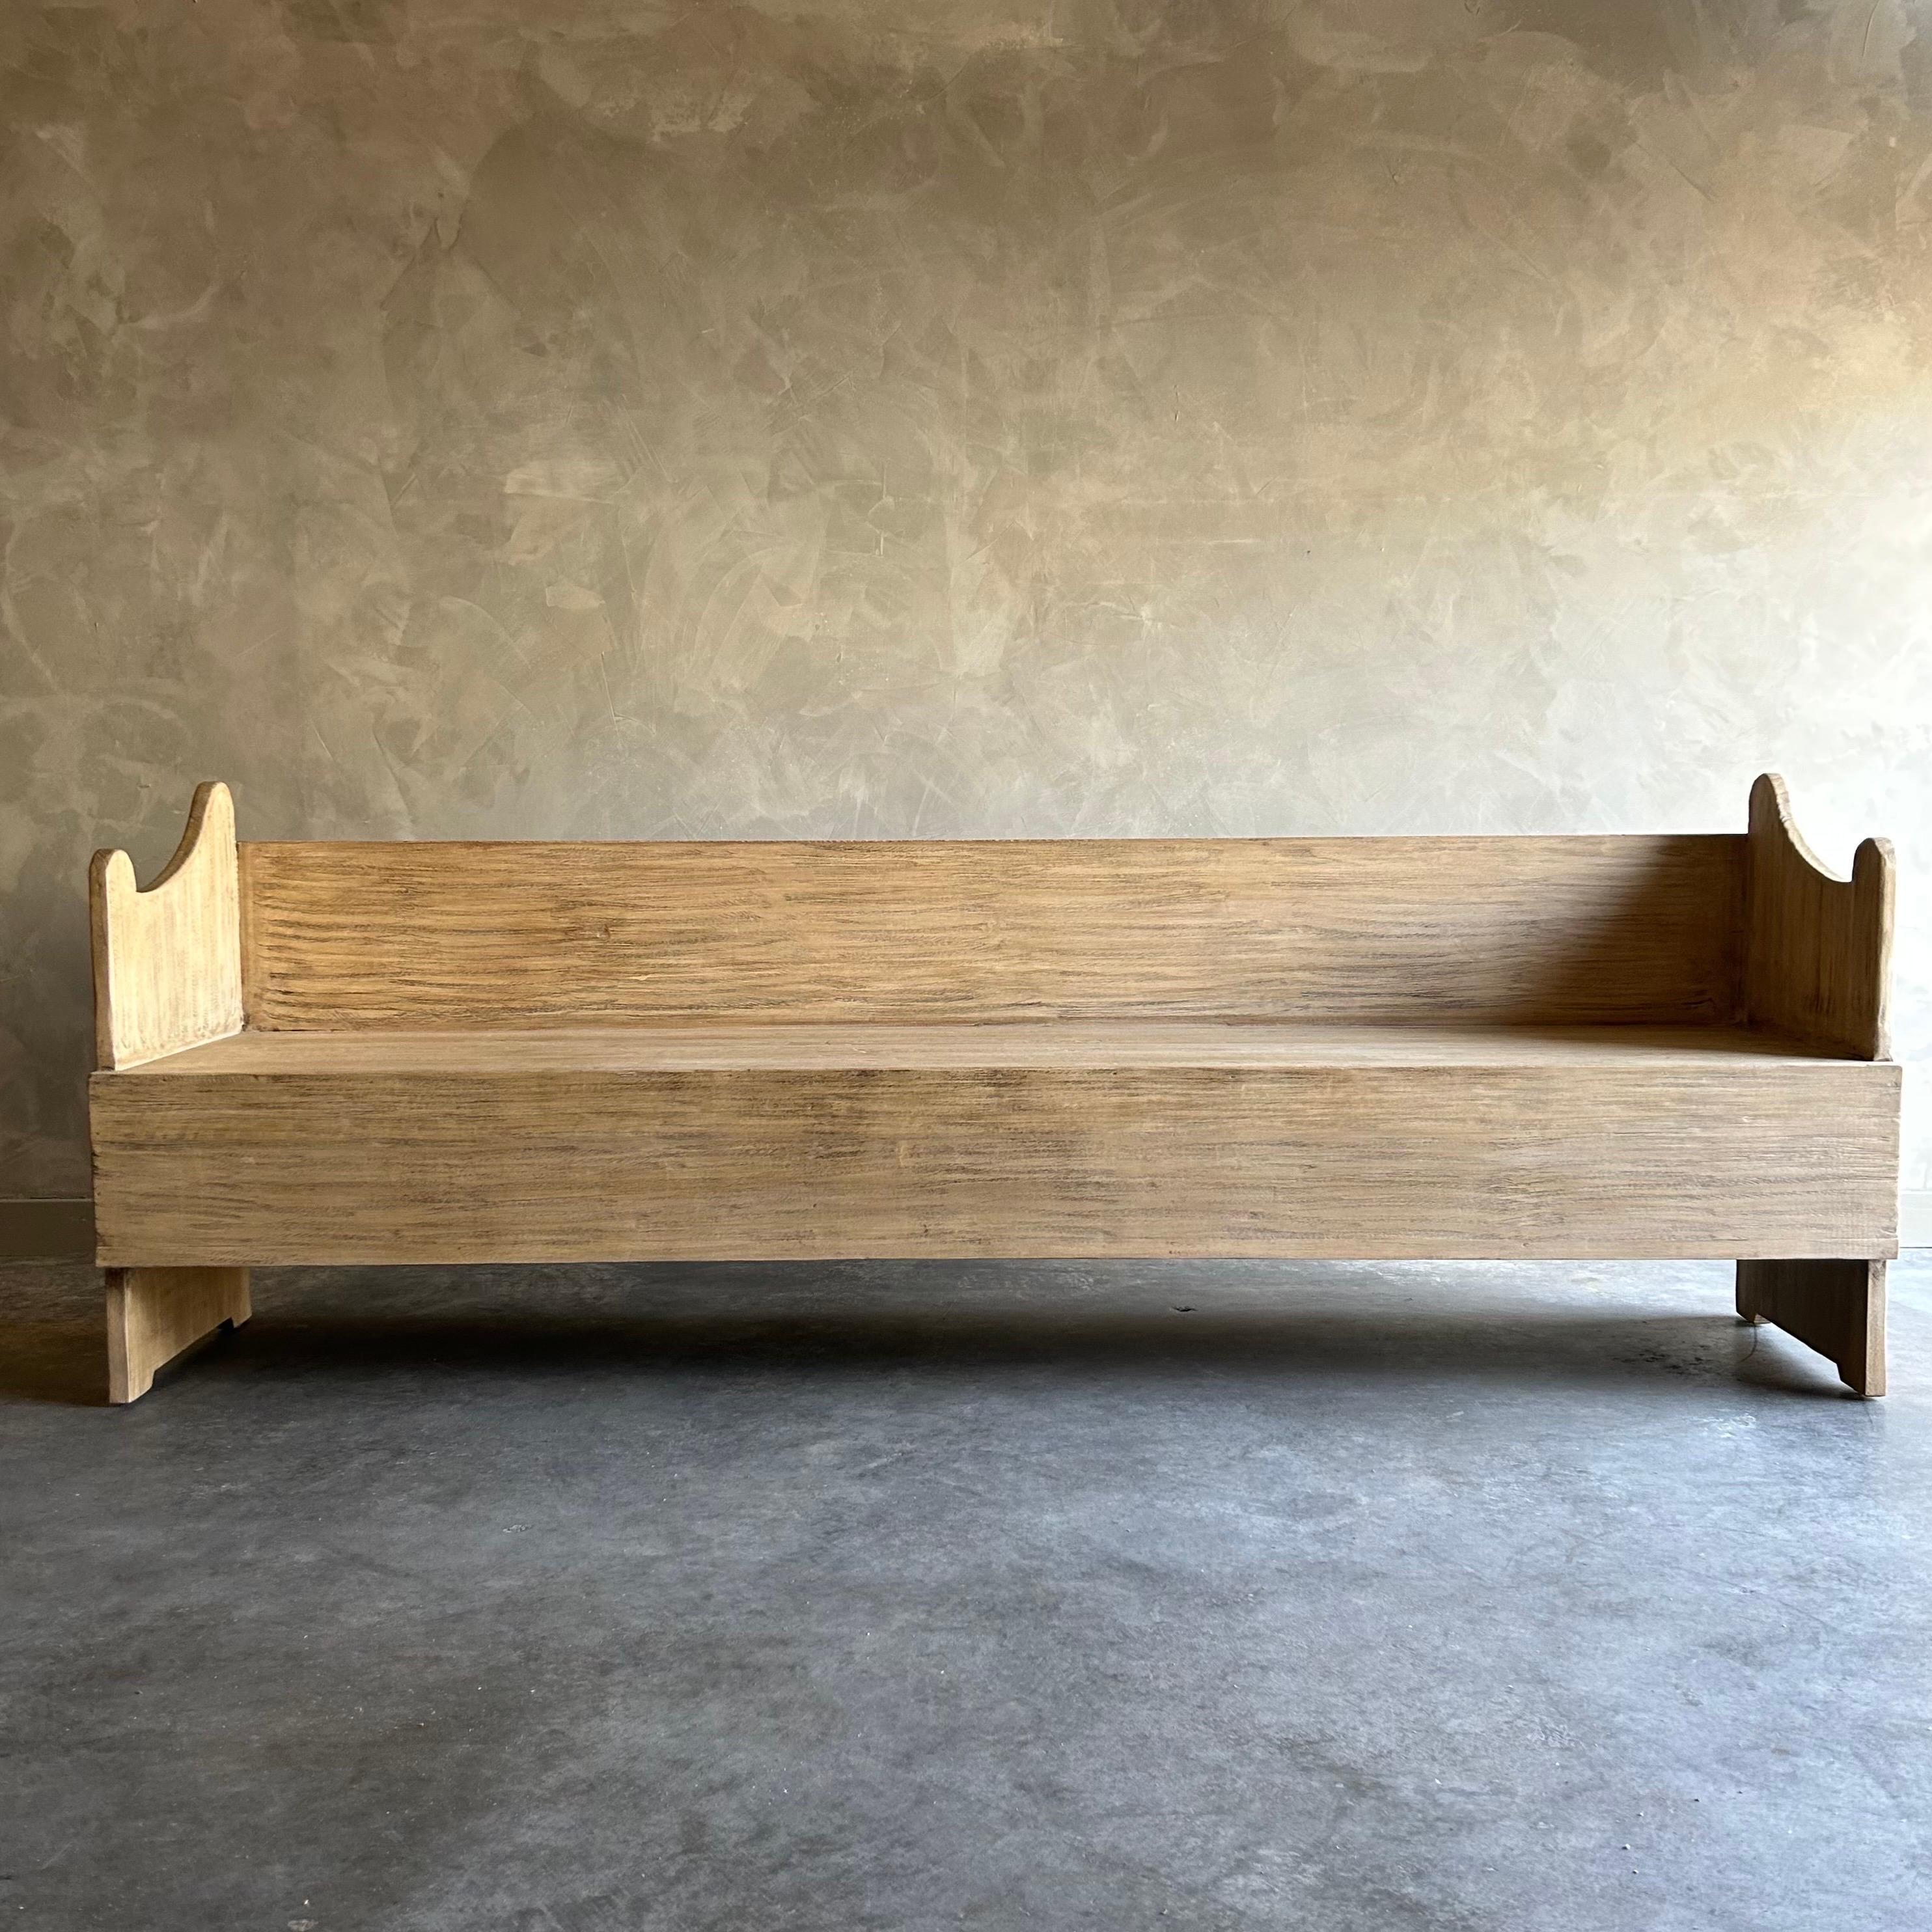 Welcome to bloomhomeinc we stock over 2000 items, please scroll down and click view sellers other items to see more!
Custom made reclaimed elm wood banquette or pew style bench.
Size: 85”w x 18”d x 30”h
Seat: 16”h x 17”d
Beautiful antique patina,